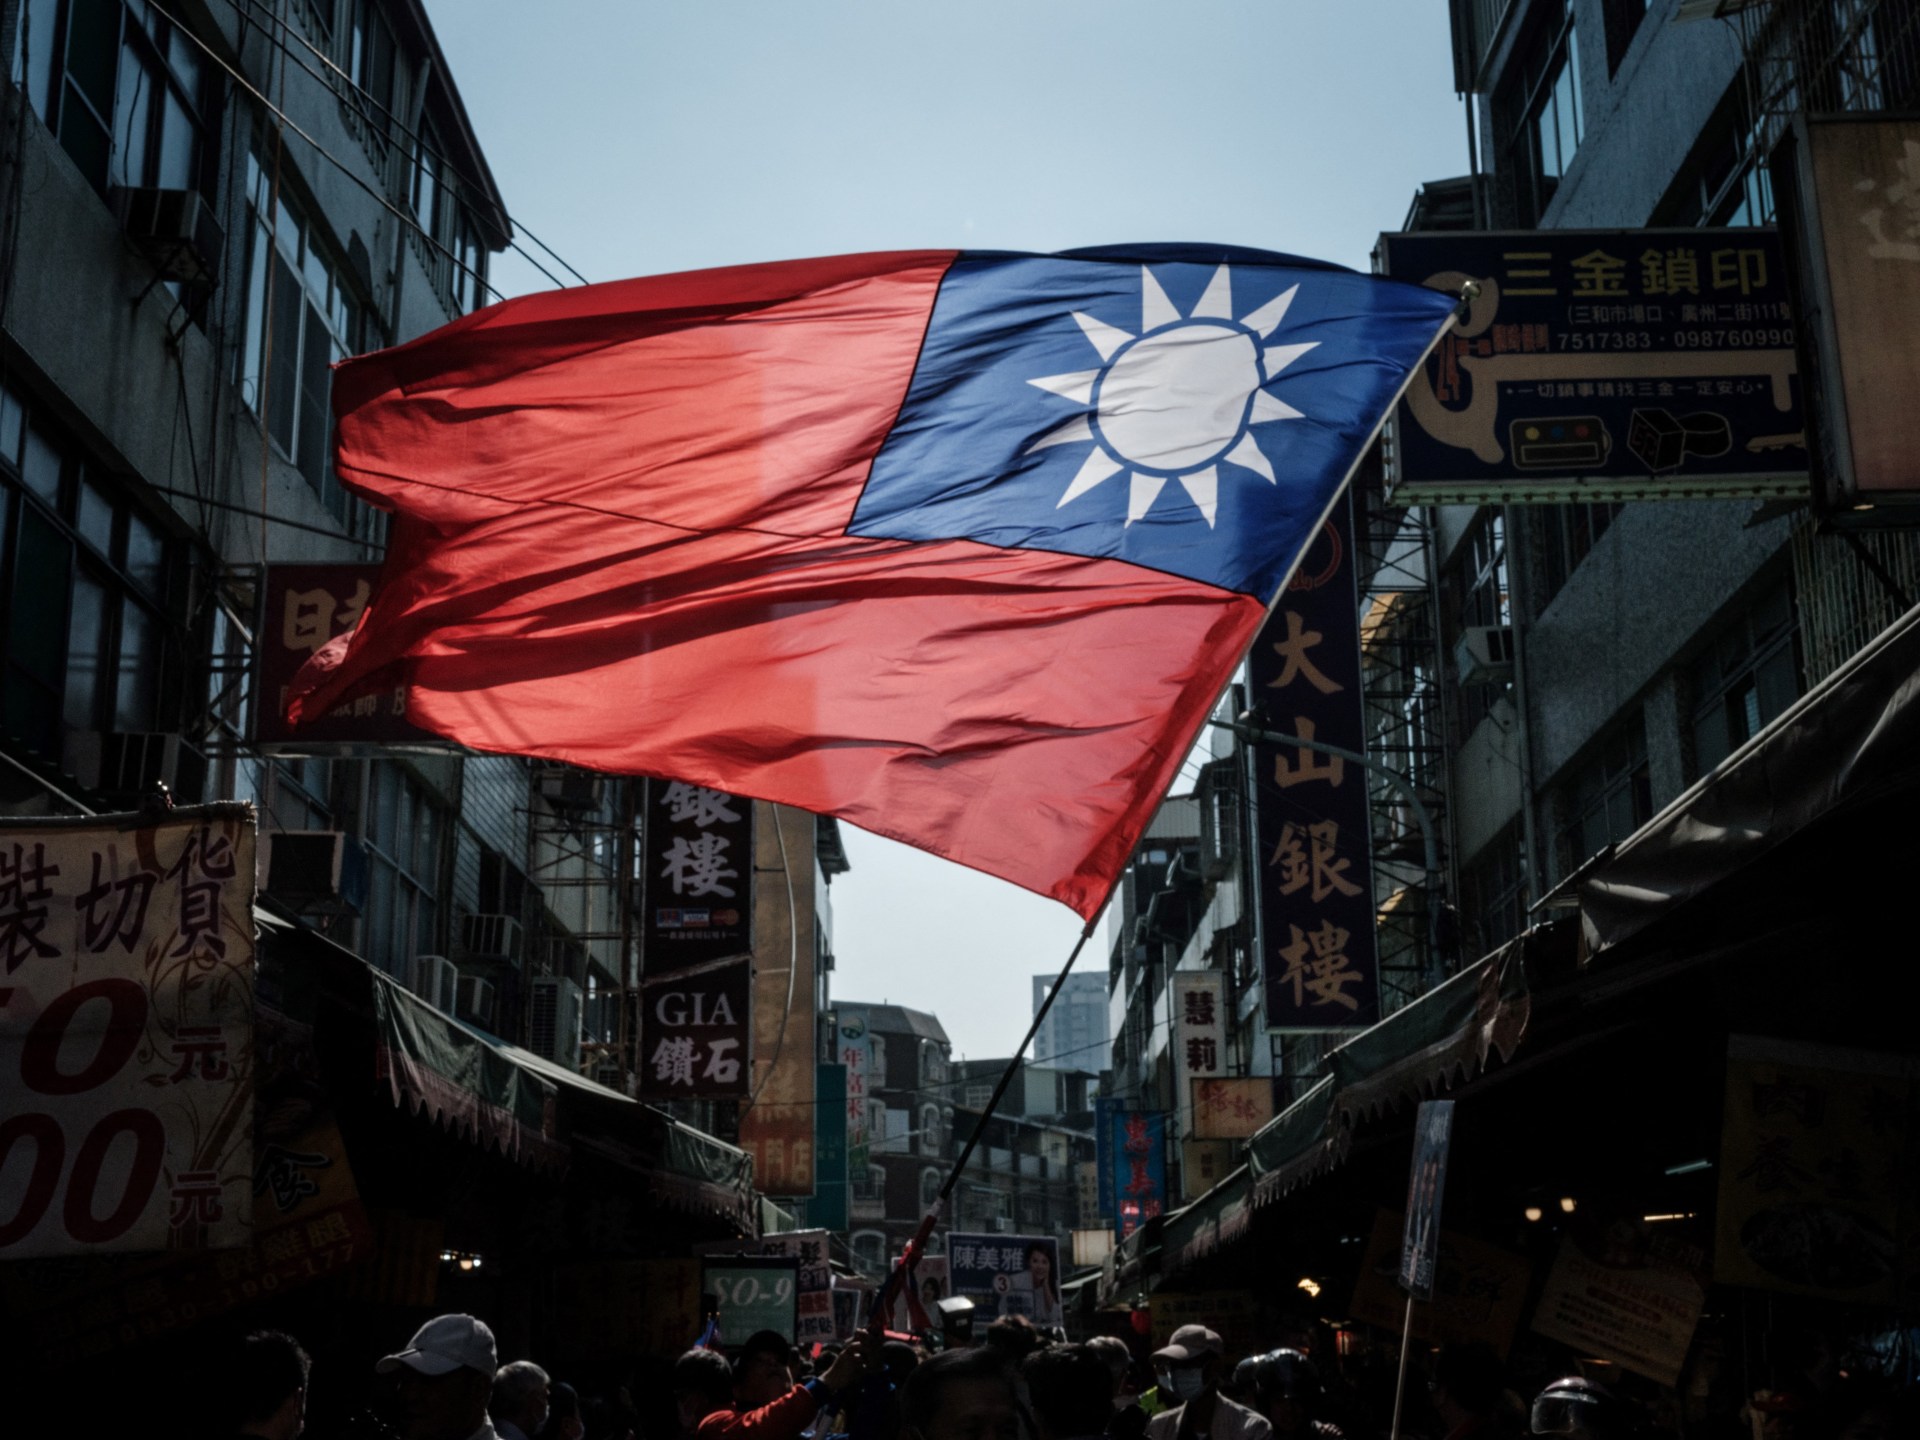 ‘A country but not a country’: Taiwan prepares to vote in China’s shadow